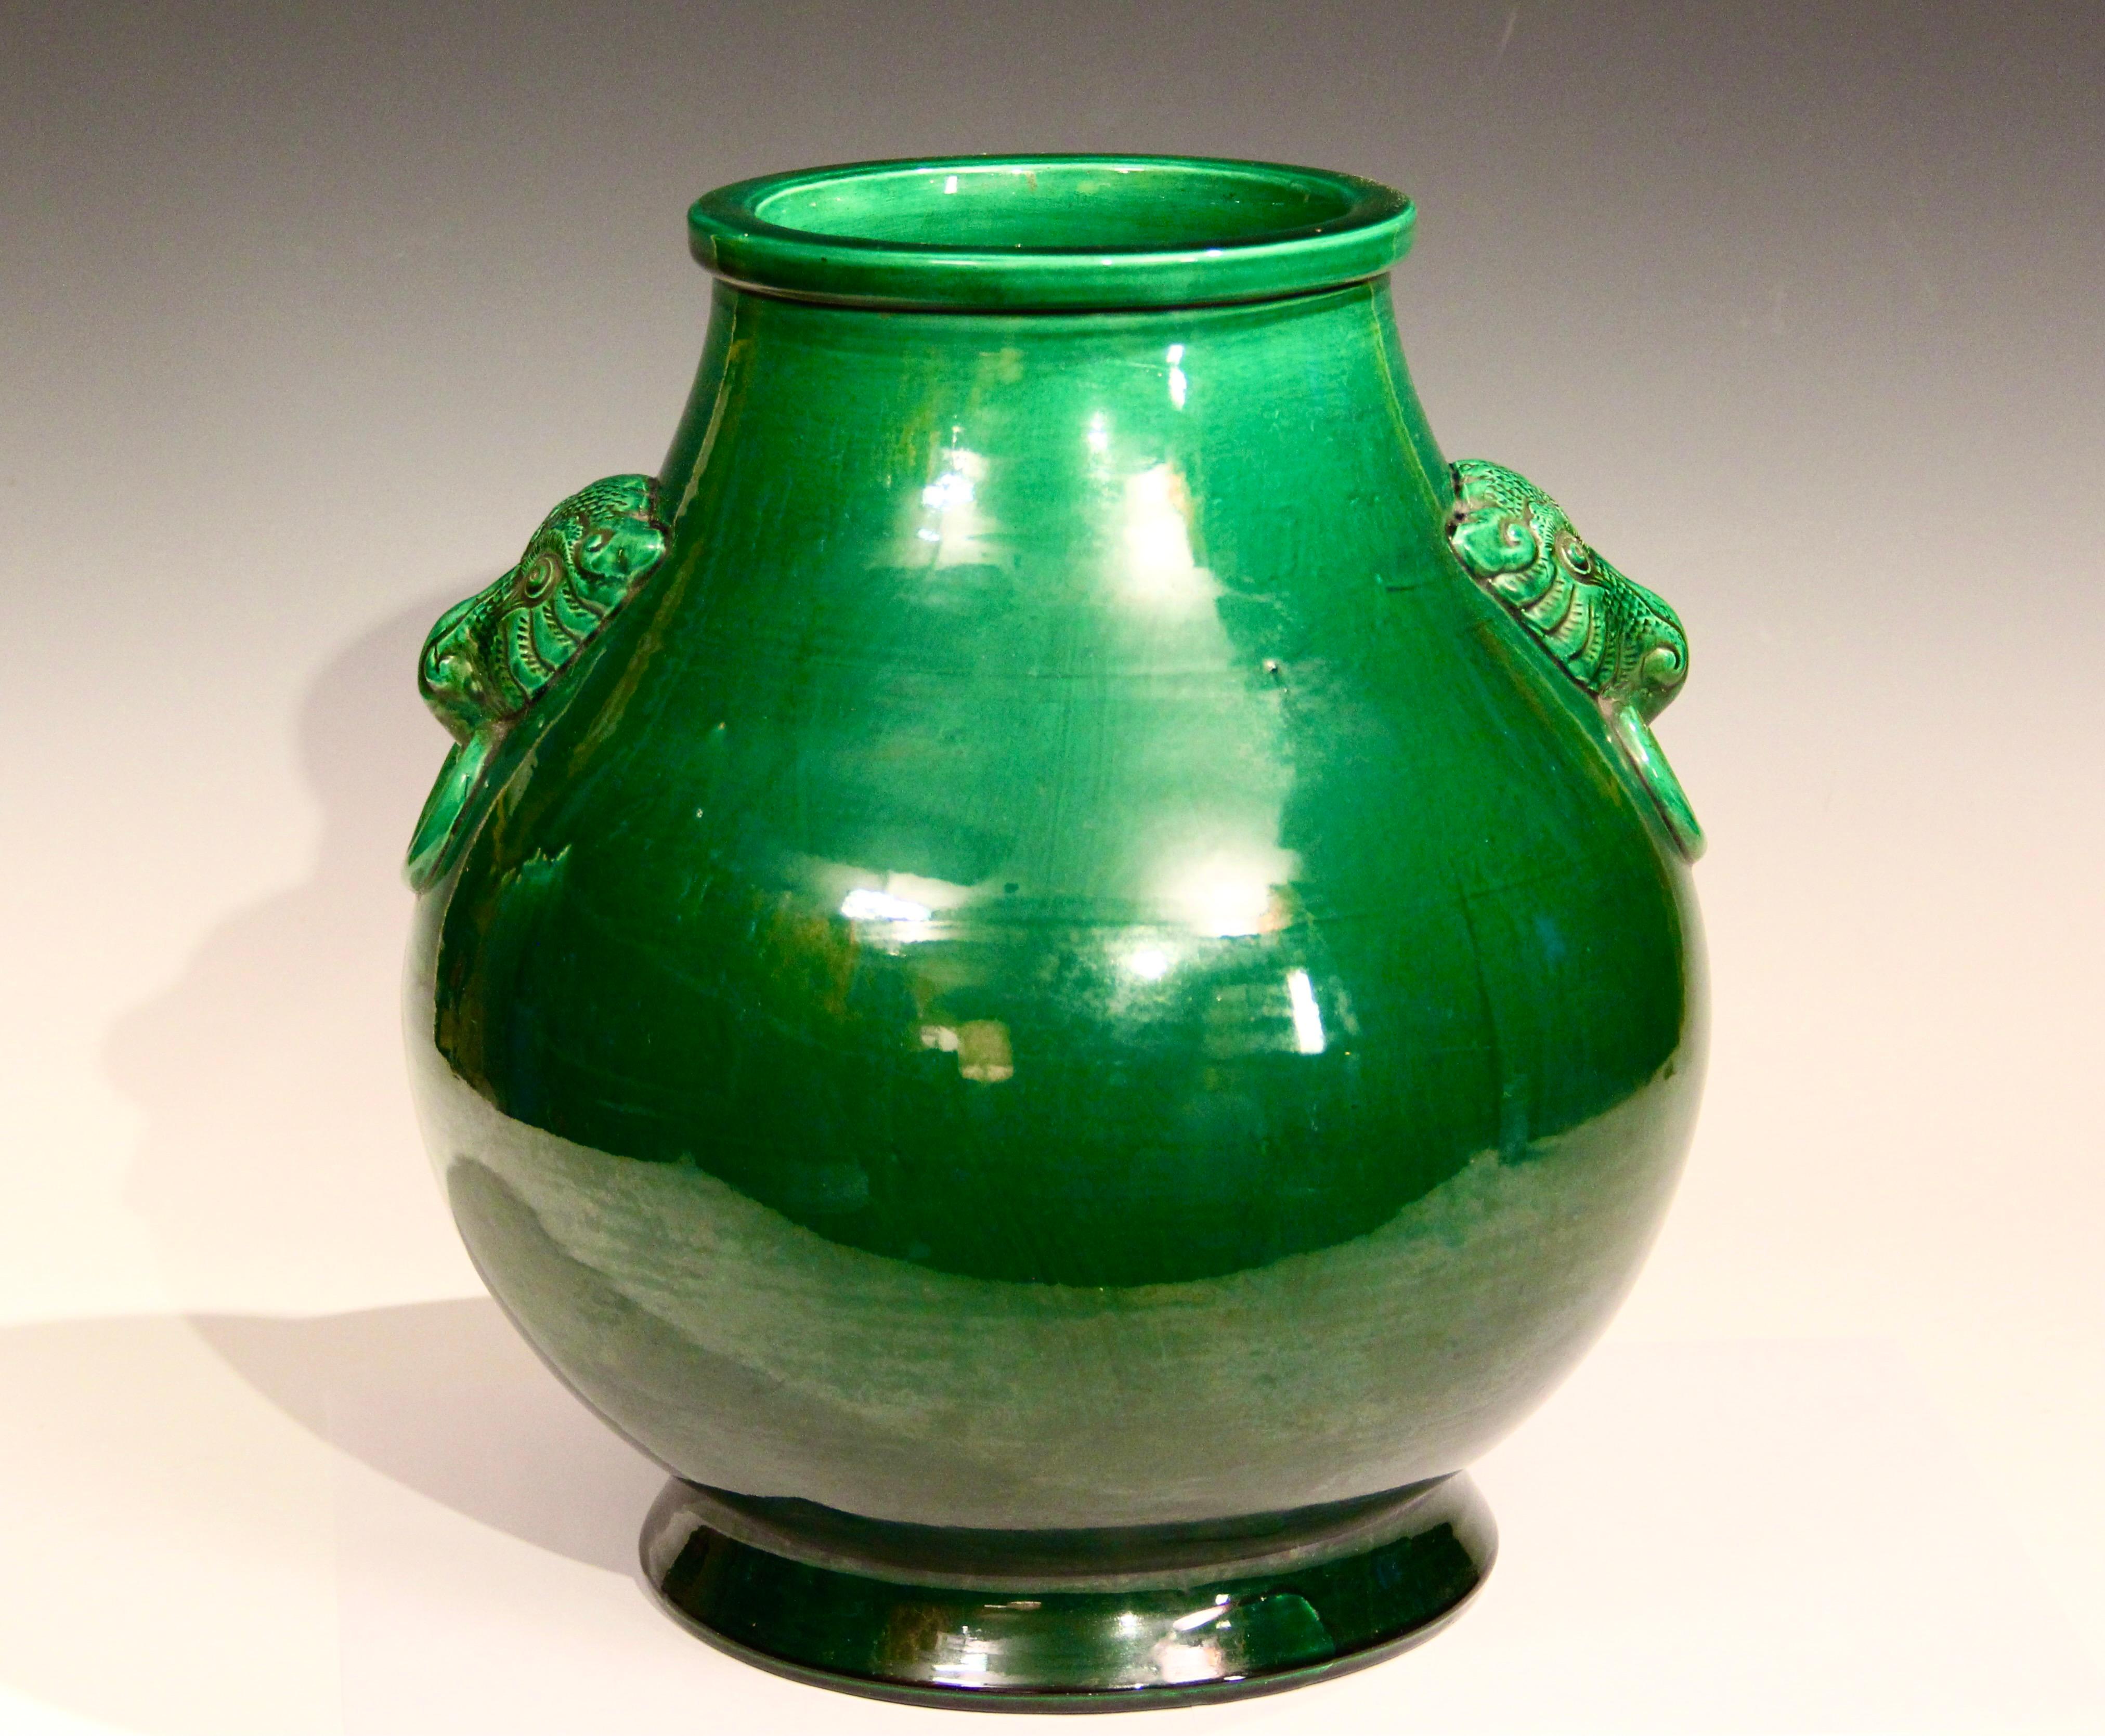 Large Awaji Hu form vase in deep green glaze, circa 1910. Inspired by an ancient Chinese bronze form with fantastic taotie mask handles. Measures: 13 1/2